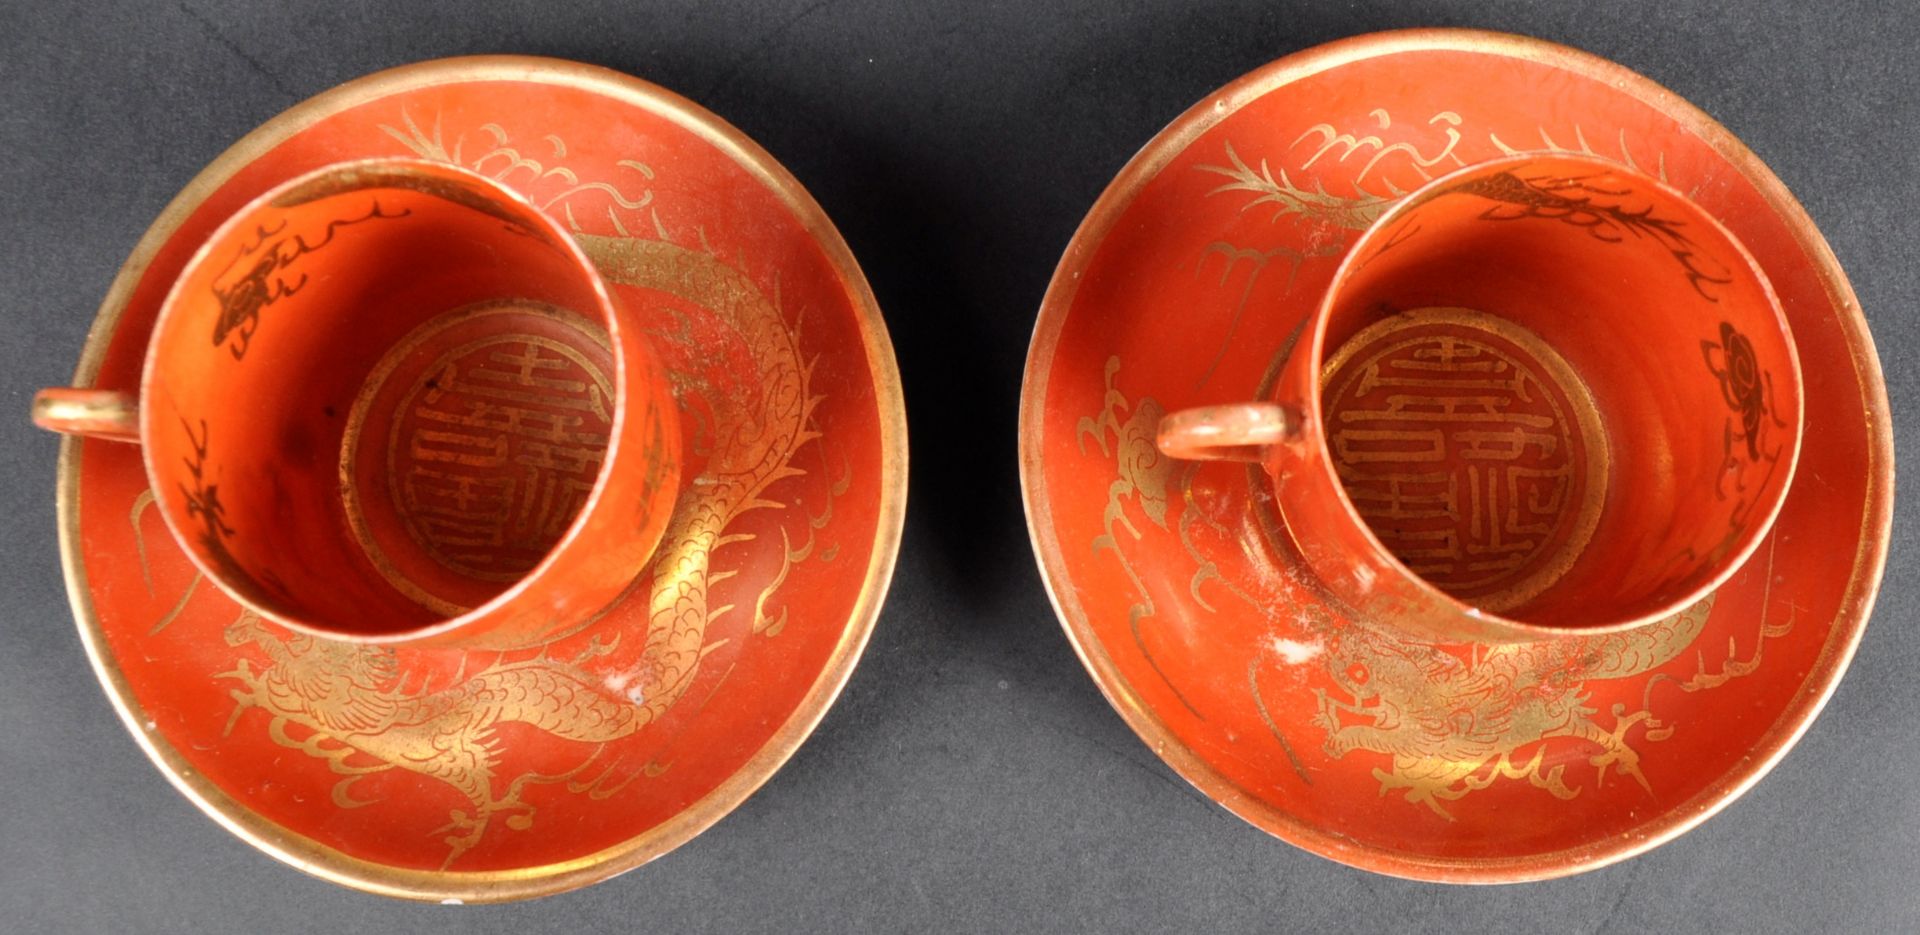 PAIR OF 19TH CENTURY CHINESE PORCELAIN TEA CUPS & SAUCERS - Image 3 of 6